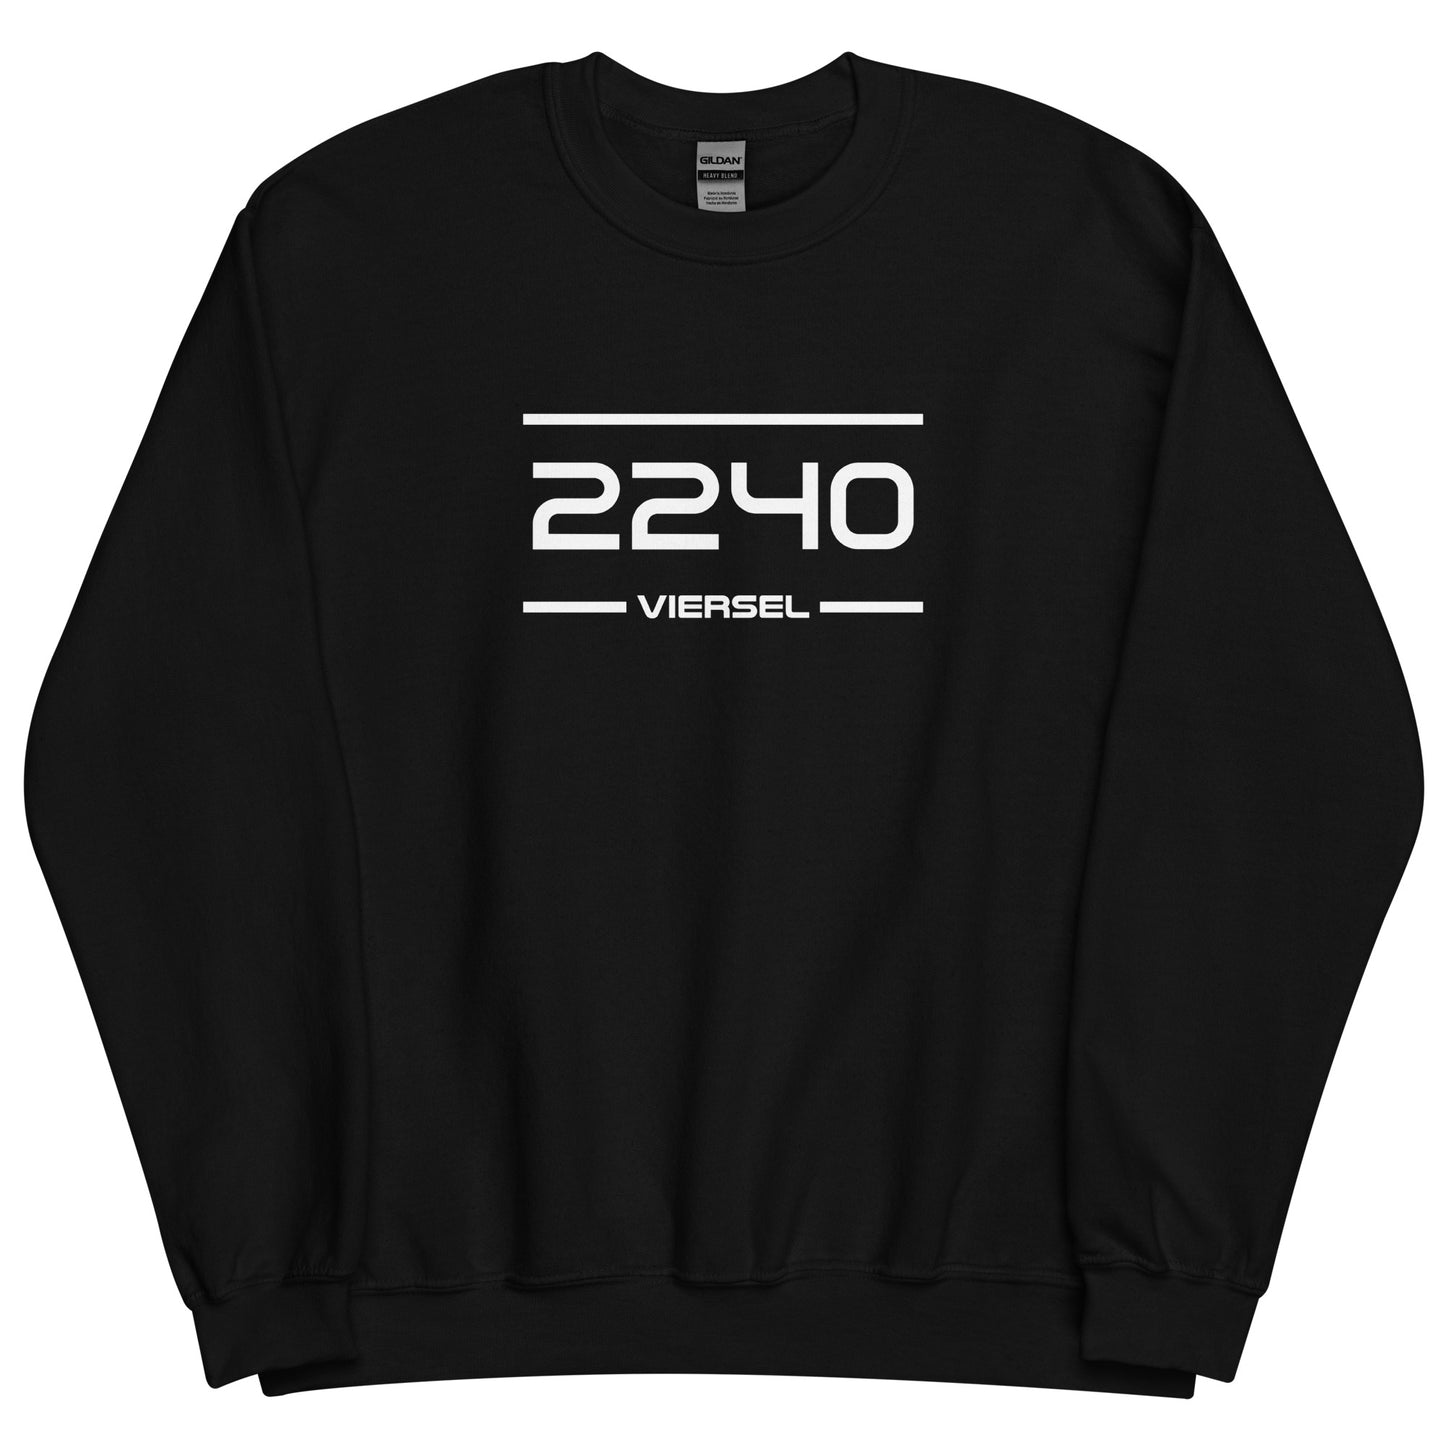 Sweater - 2240 - Viersel (M/V)